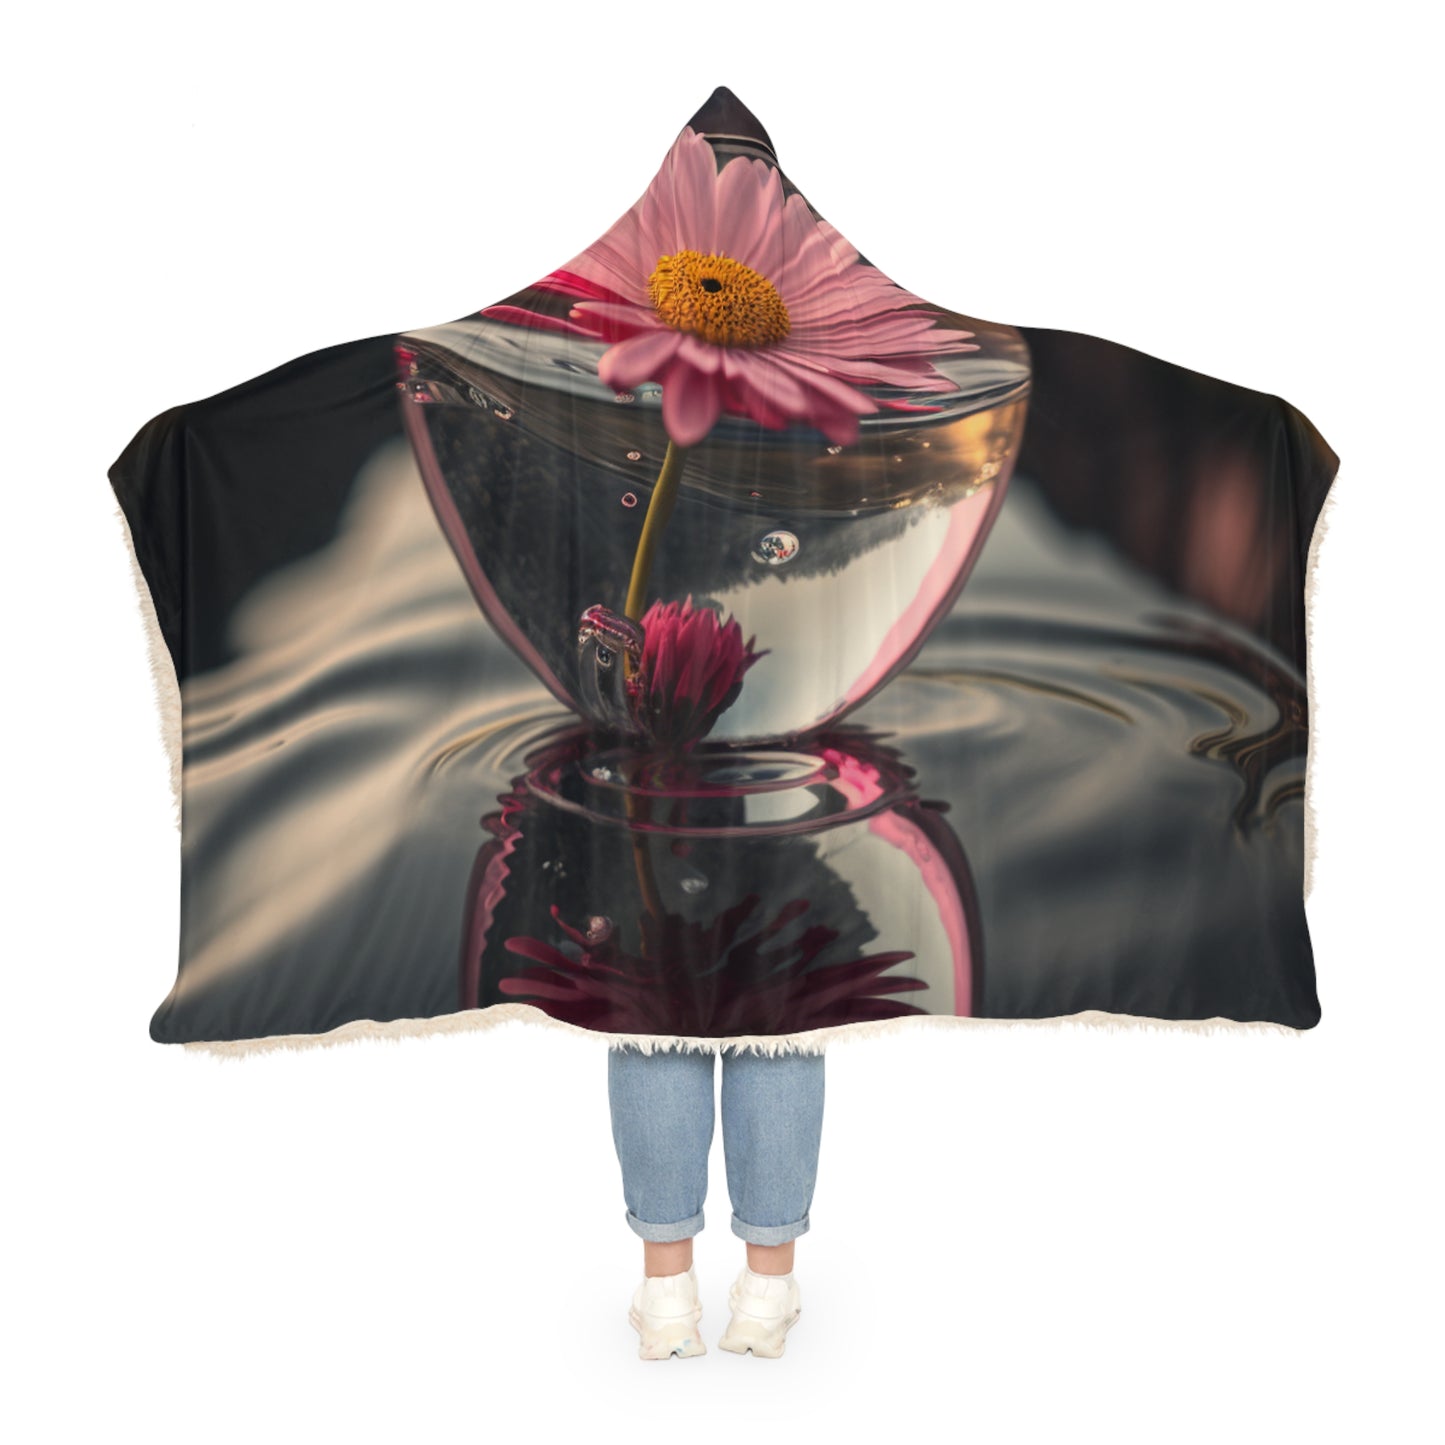 Snuggle Hooded Blanket Daisy in a vase 2